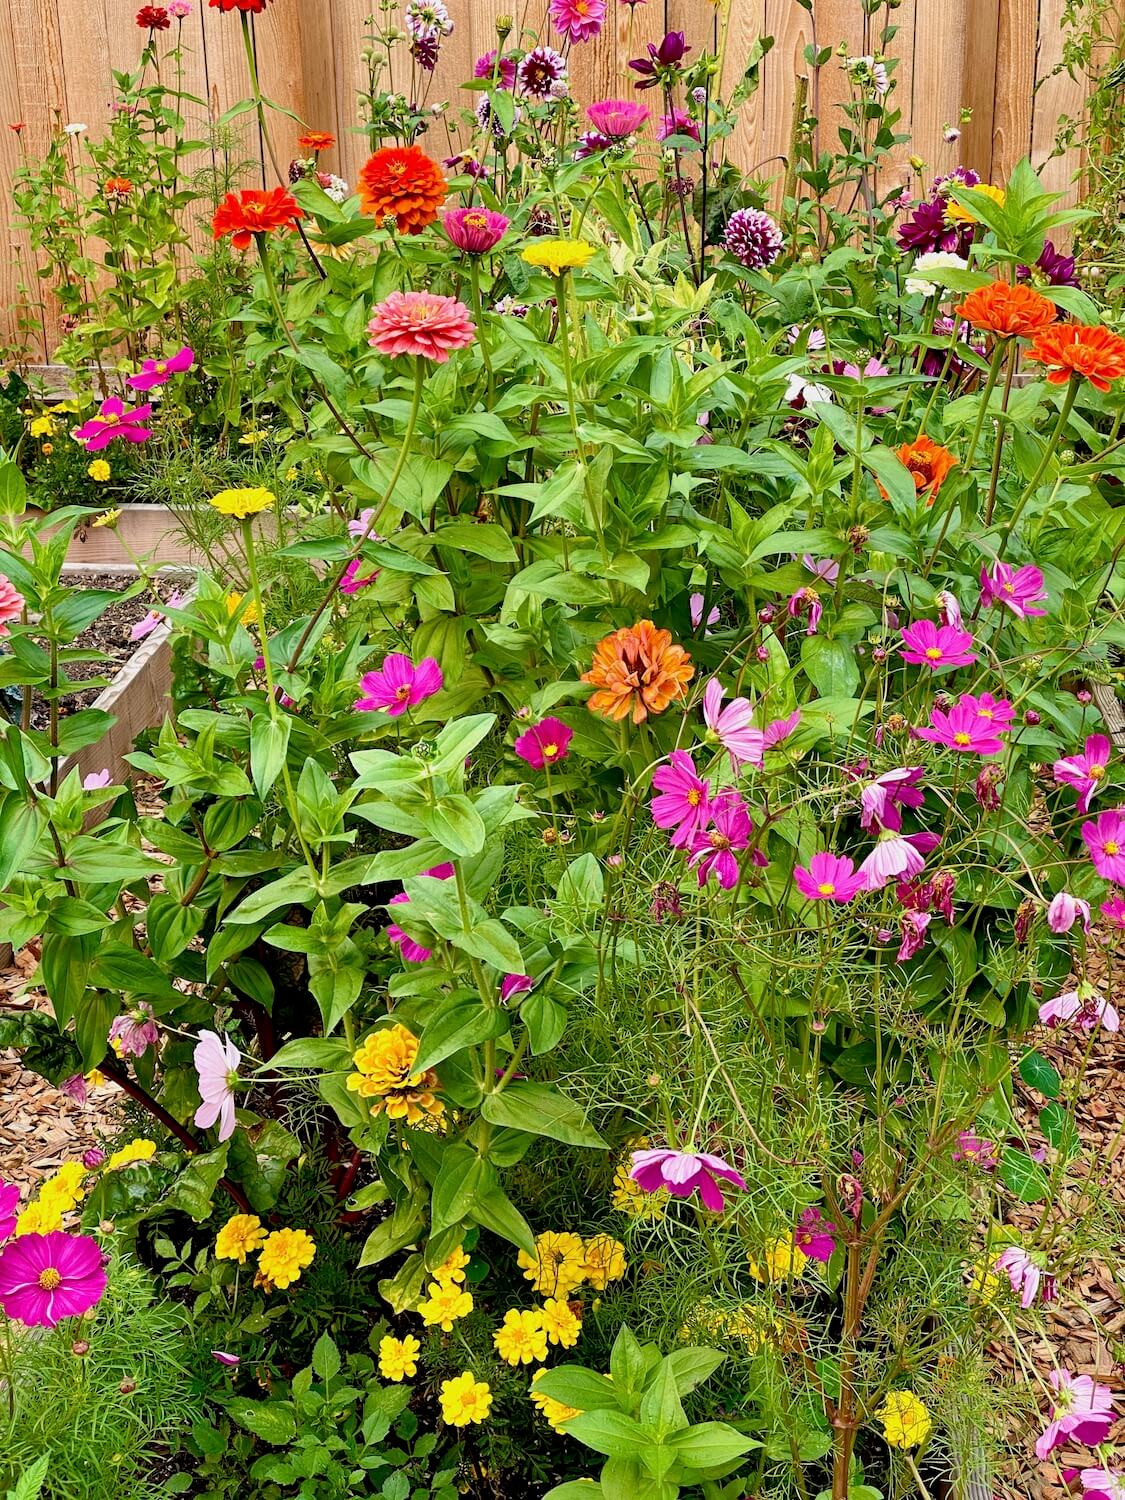 As assortment of colorful flowers overtake a planter box in a photo of a Seattle P-Patch city garden. The flowers are a variety of orange, red and yellow colors amongst light green leaves.